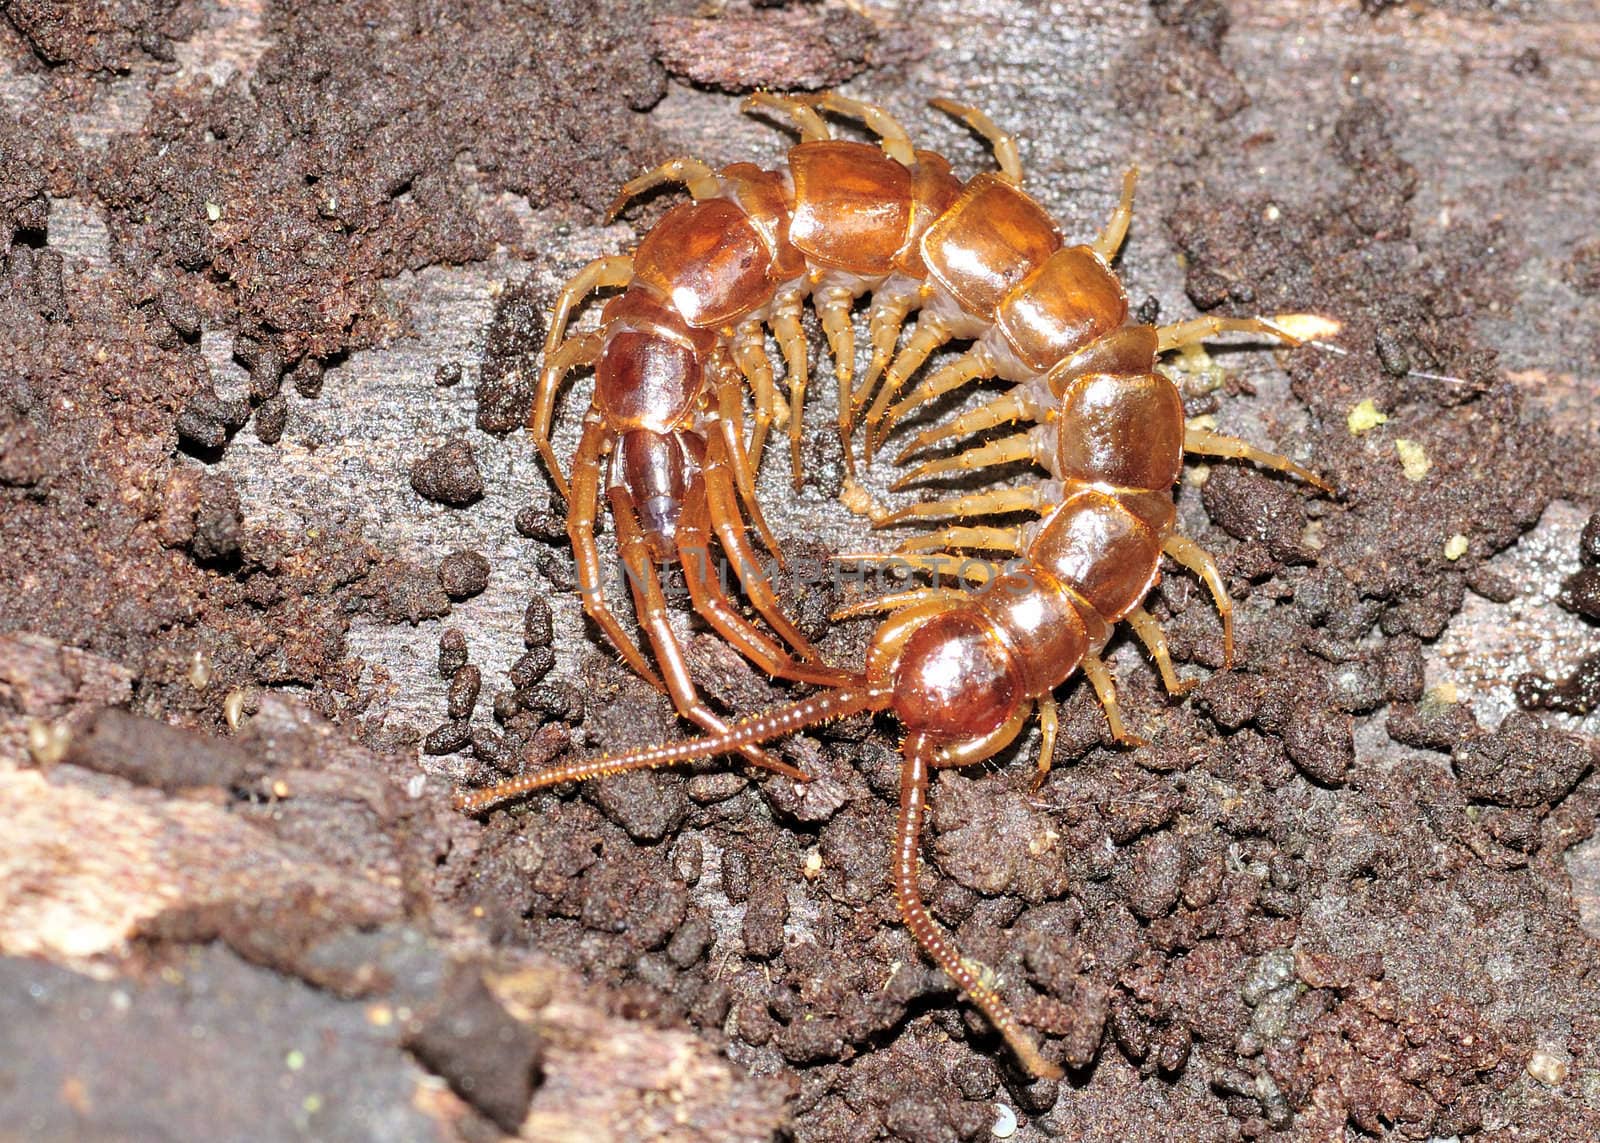 A centipede curled up on a wooden log.